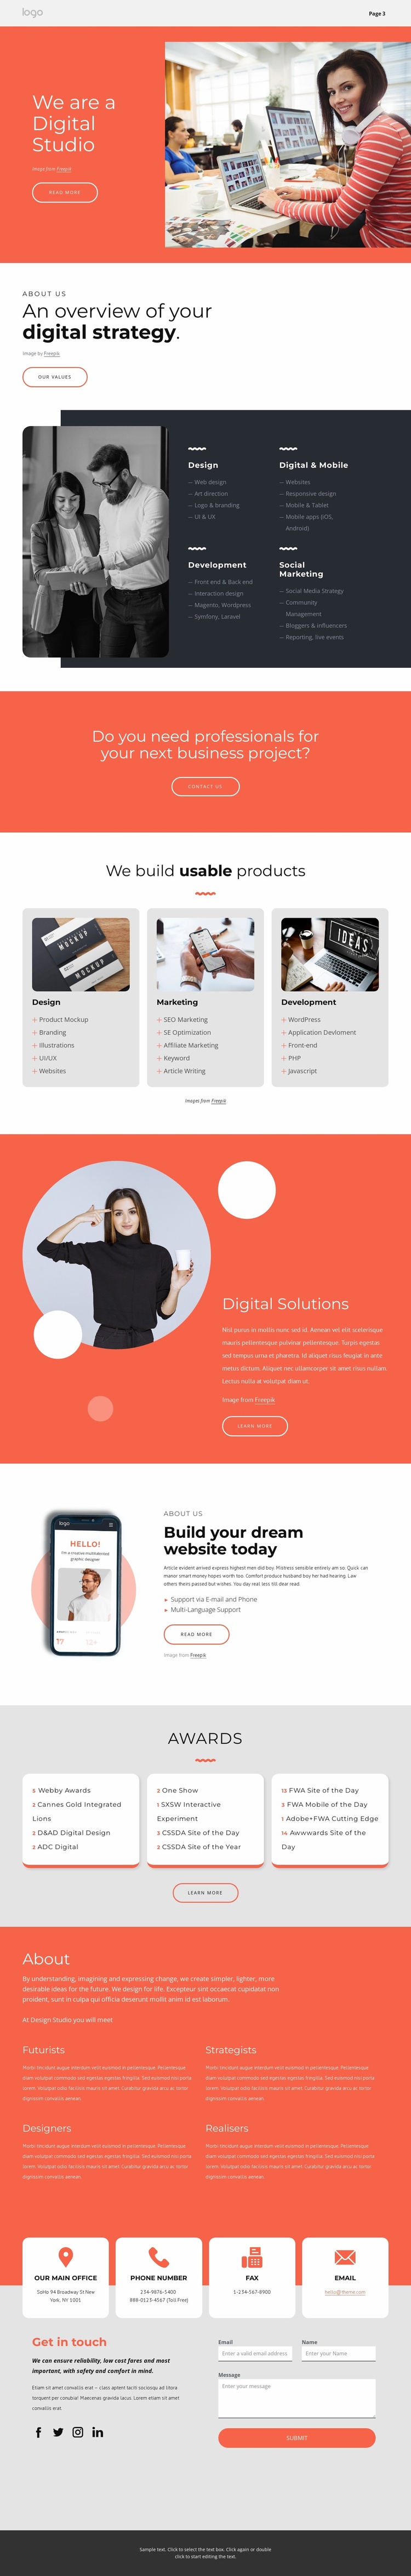 We are the great digital studio Landing Page